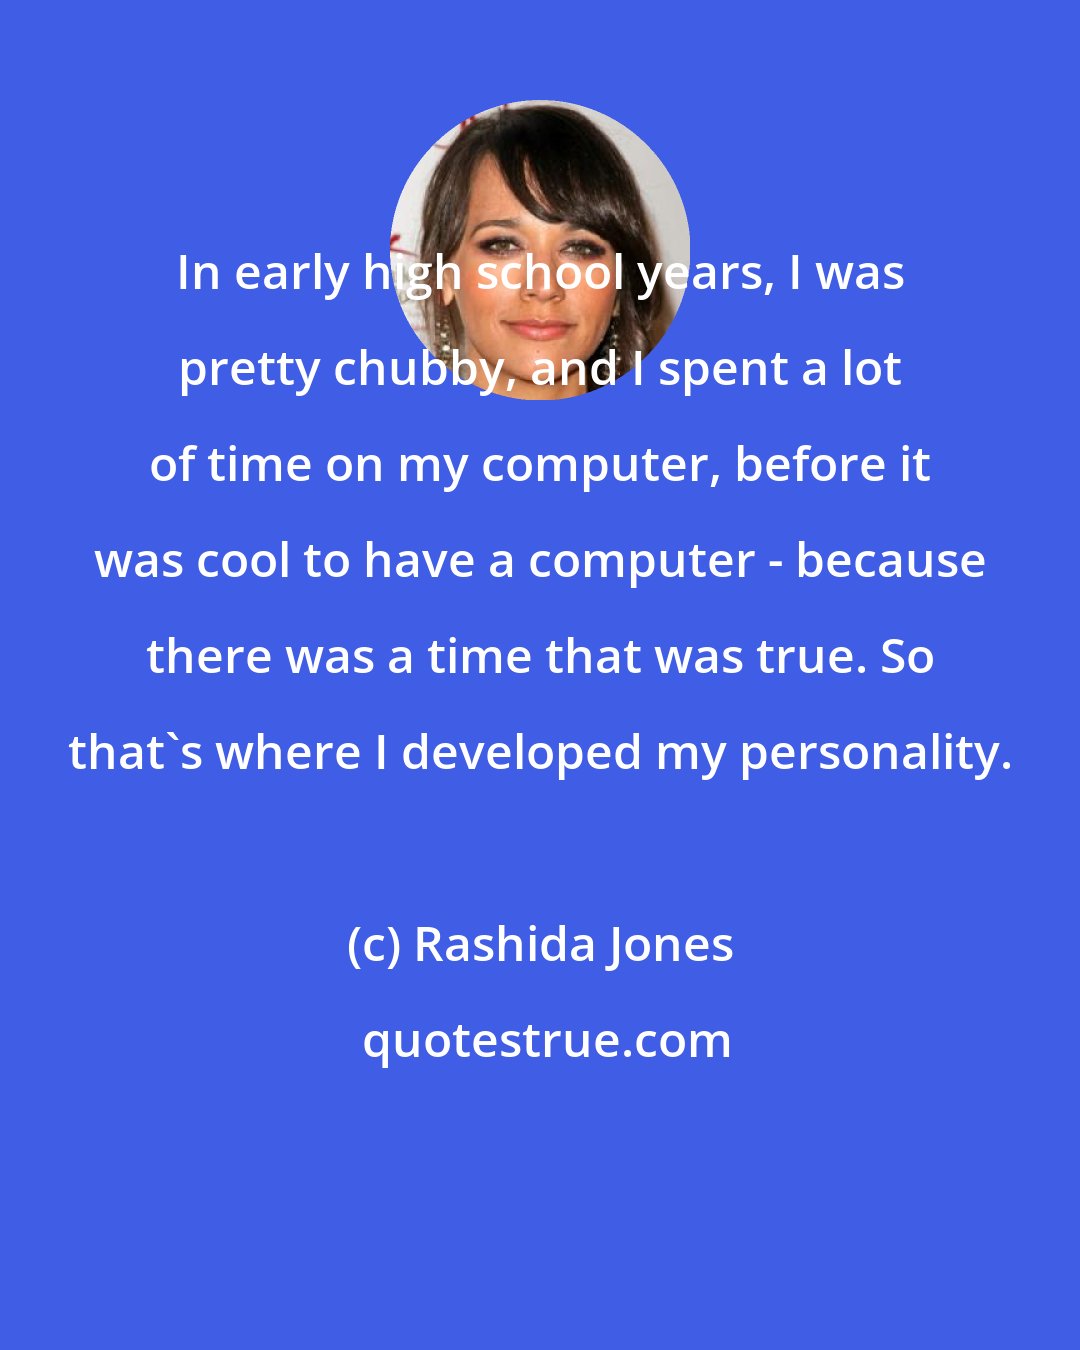 Rashida Jones: In early high school years, I was pretty chubby, and I spent a lot of time on my computer, before it was cool to have a computer - because there was a time that was true. So that's where I developed my personality.